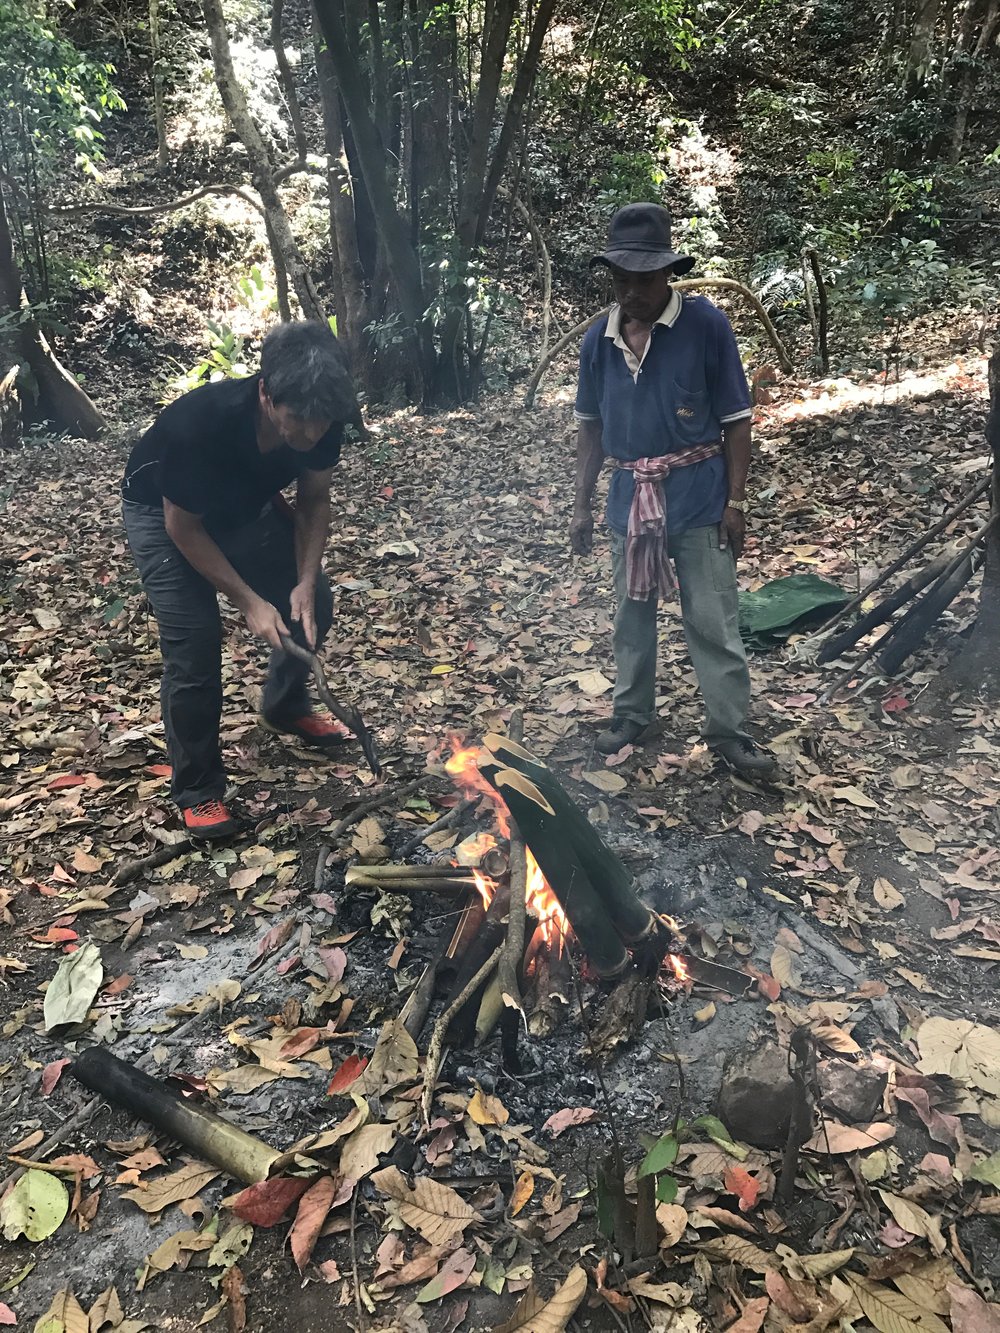 Making lunch in the jungle